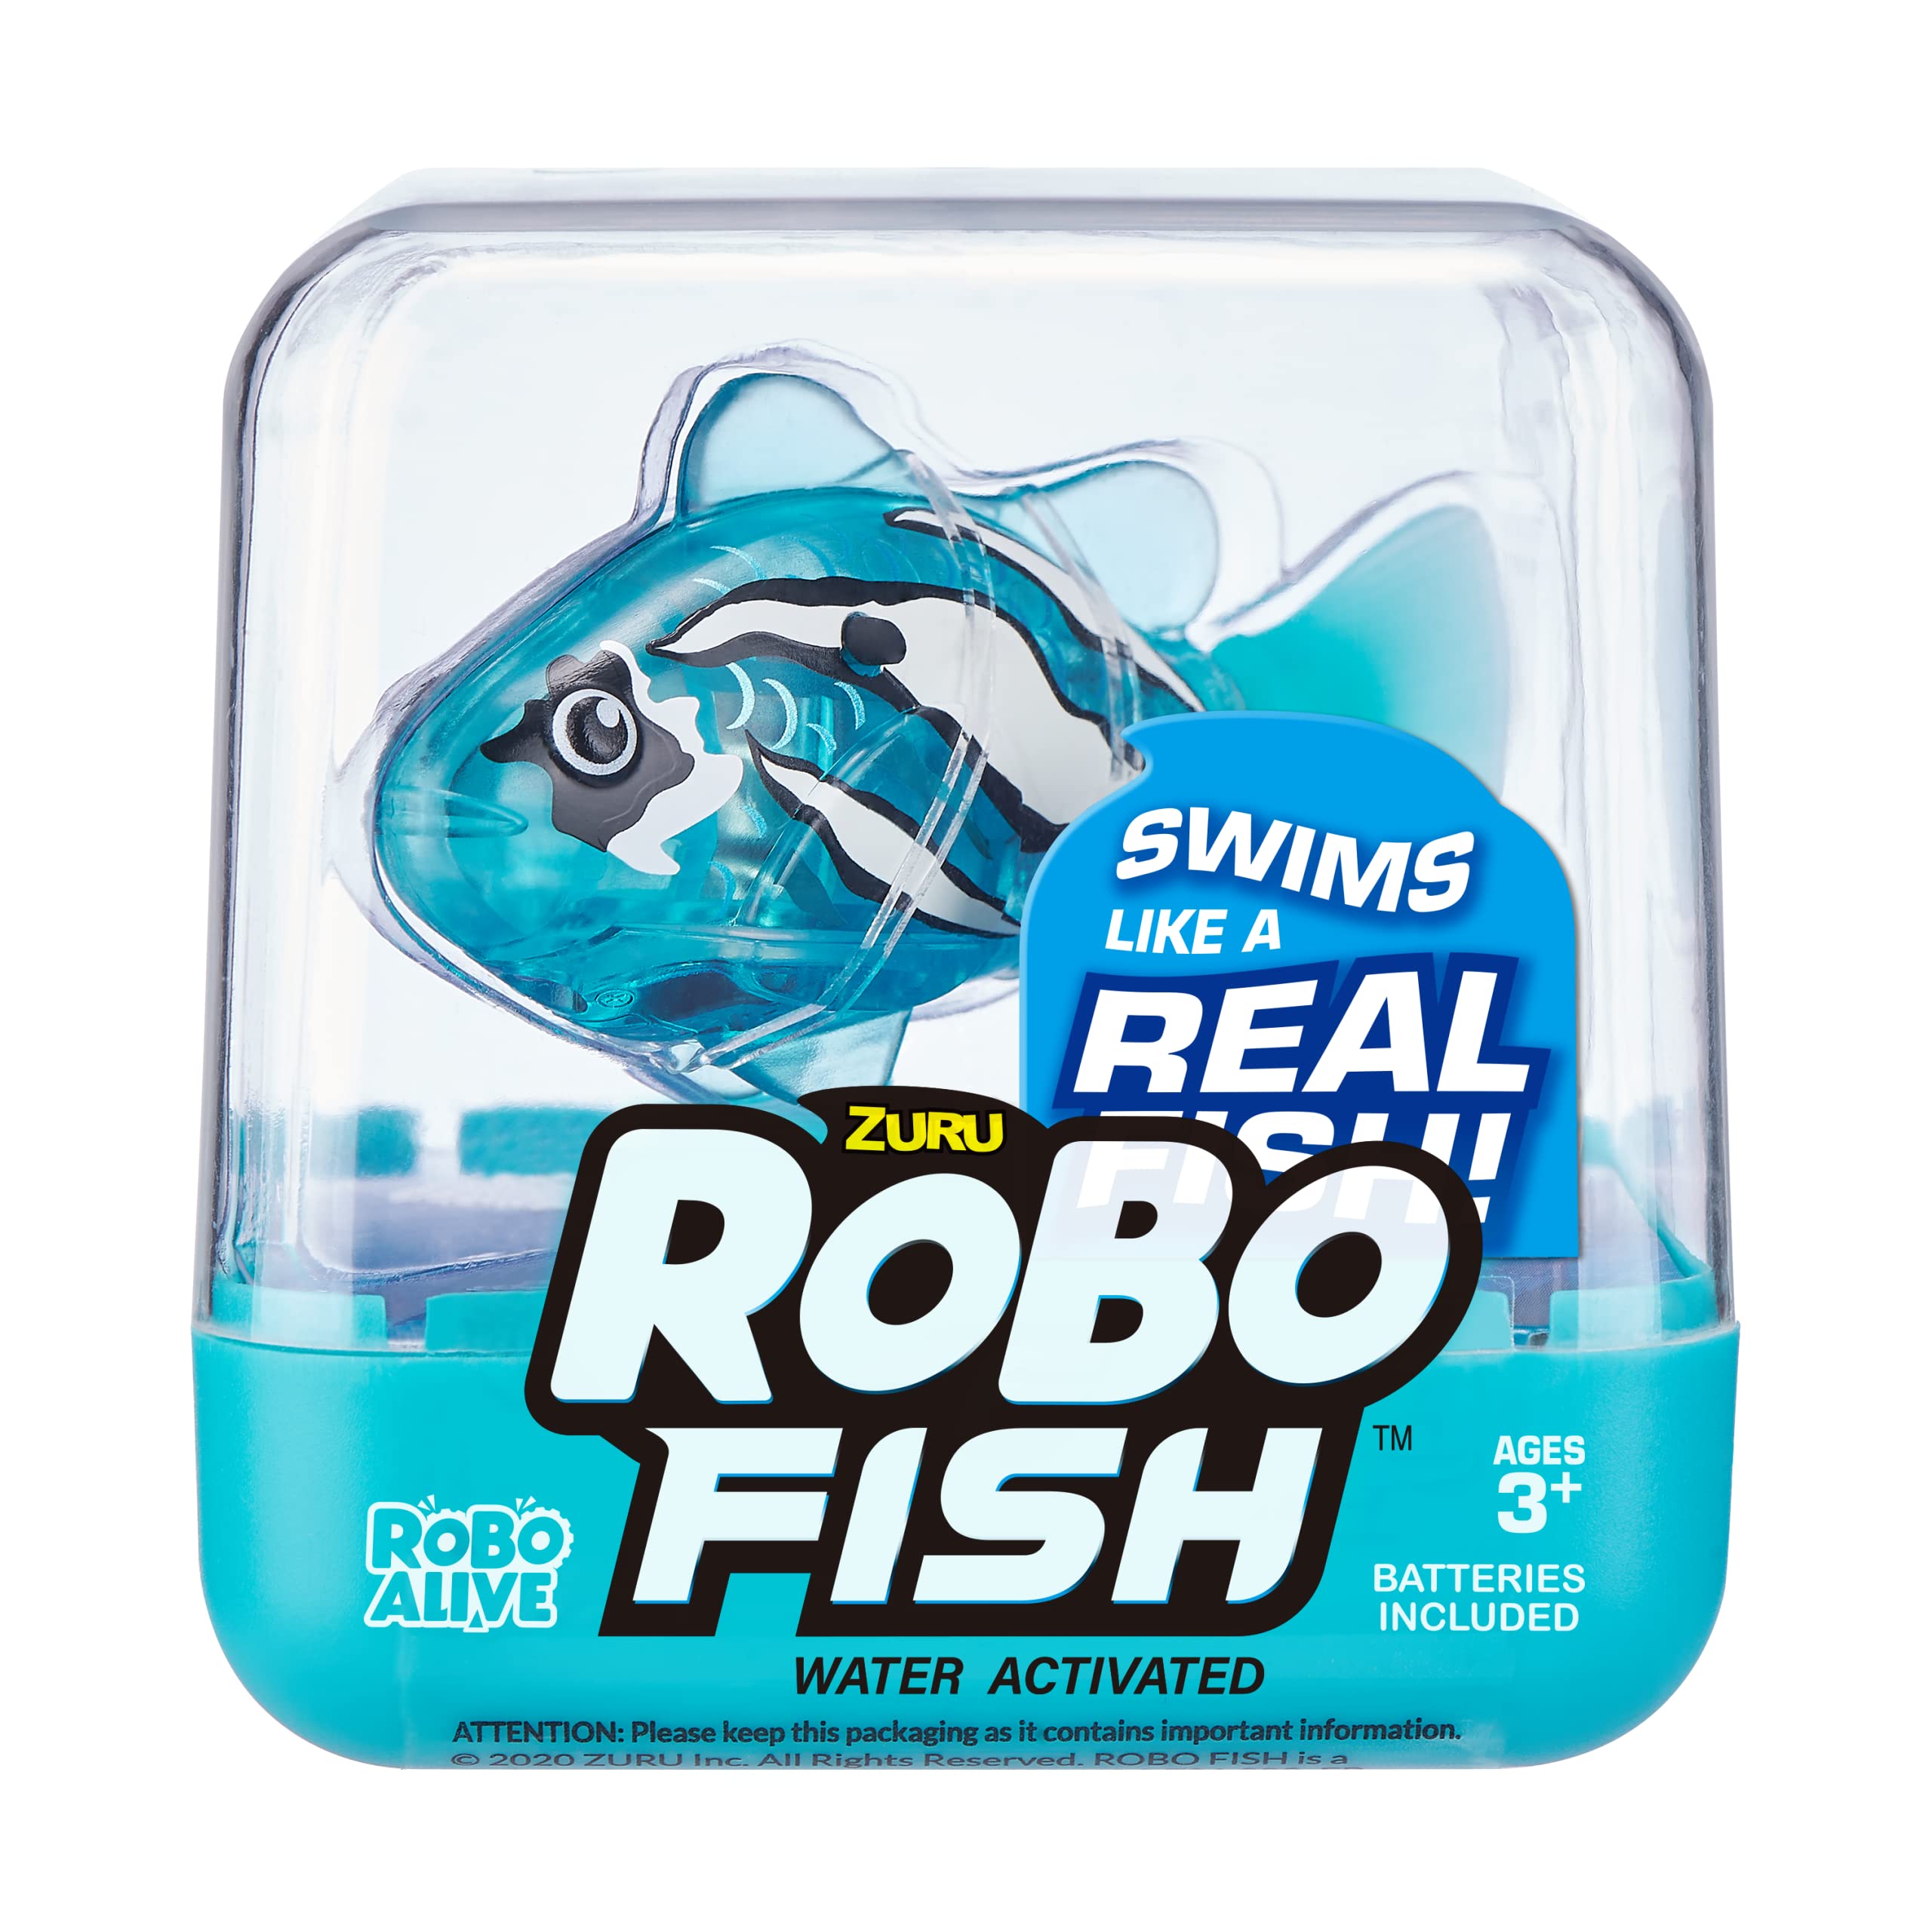 Robo Alive Robo Fish Robotic Swimming Fish (Teal + Orange 2 Pack) by ZURU Water Activated, Changes Color, Comes with Batteries, Amazon Exclusive - Teal + Orange (2 Pack)